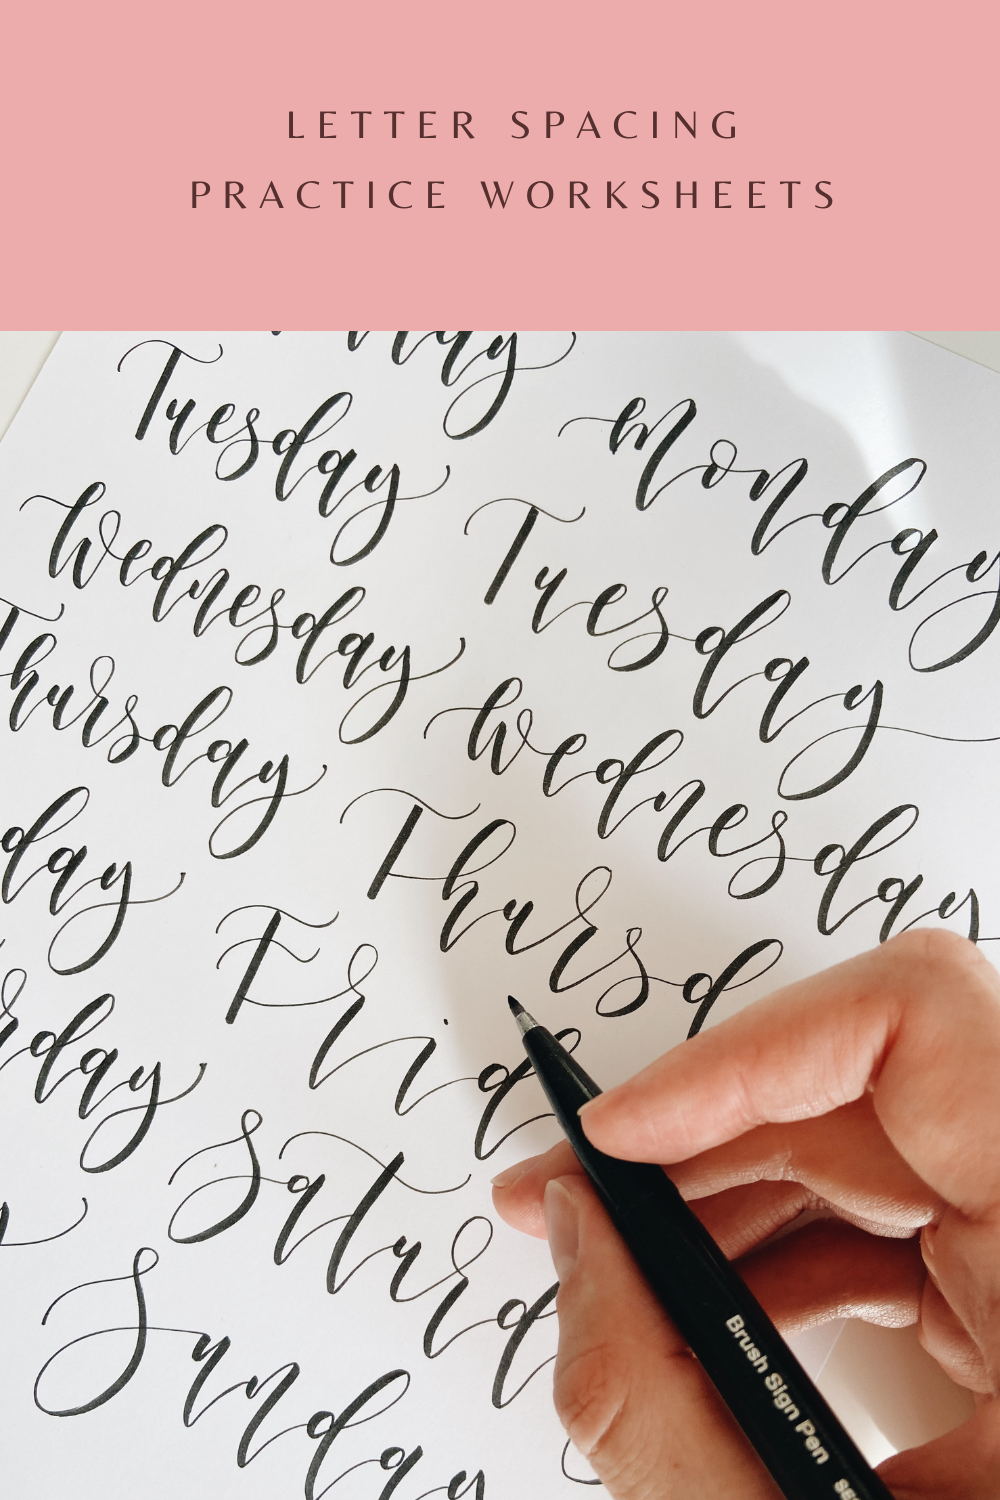 Hand lettering and Calligraphy for beginners